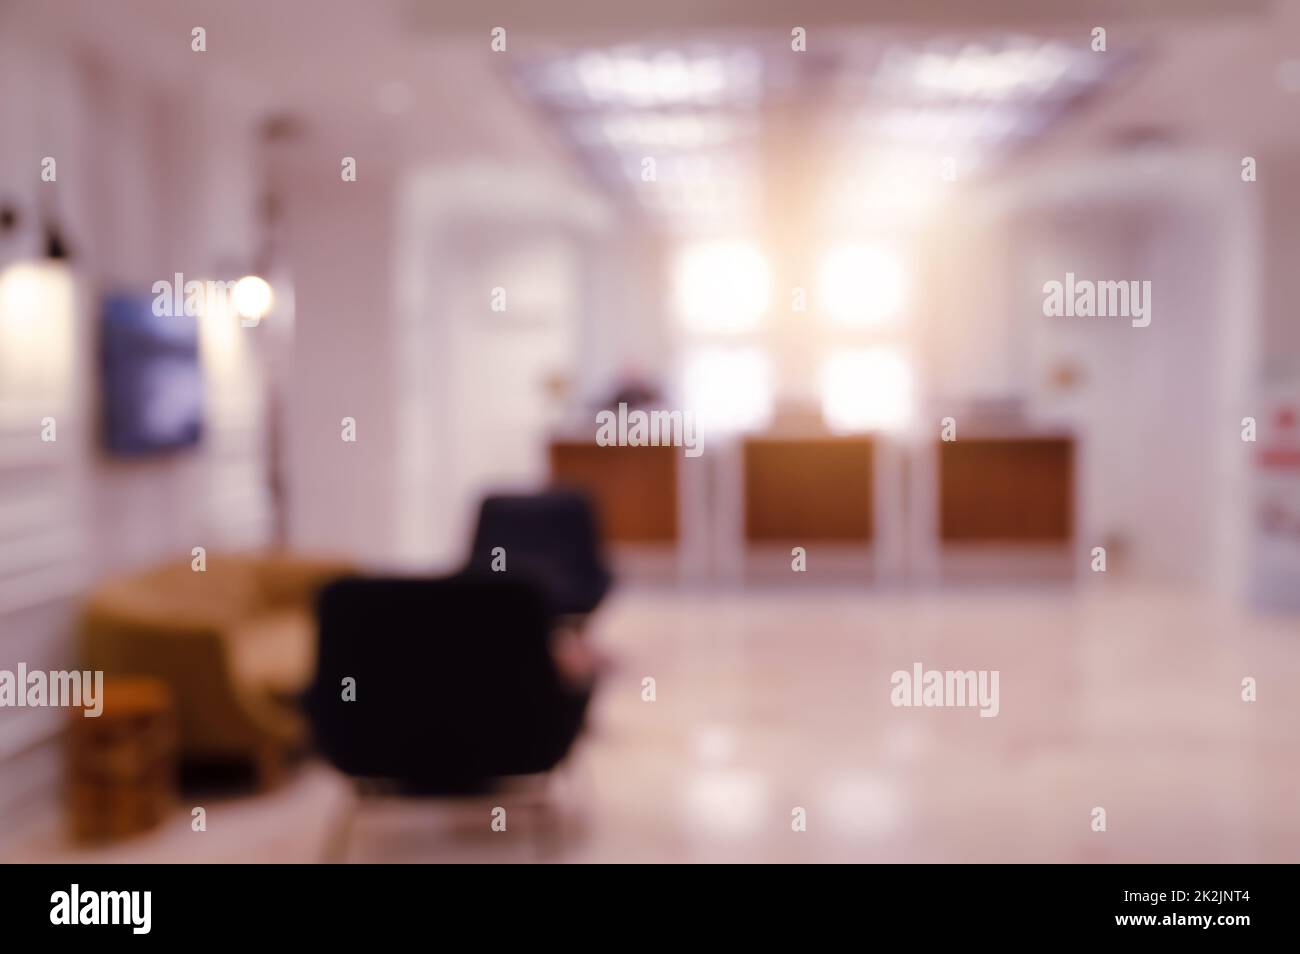 Abstract blurred background of hotel lobby interior. Business travel concept. Stock Photo